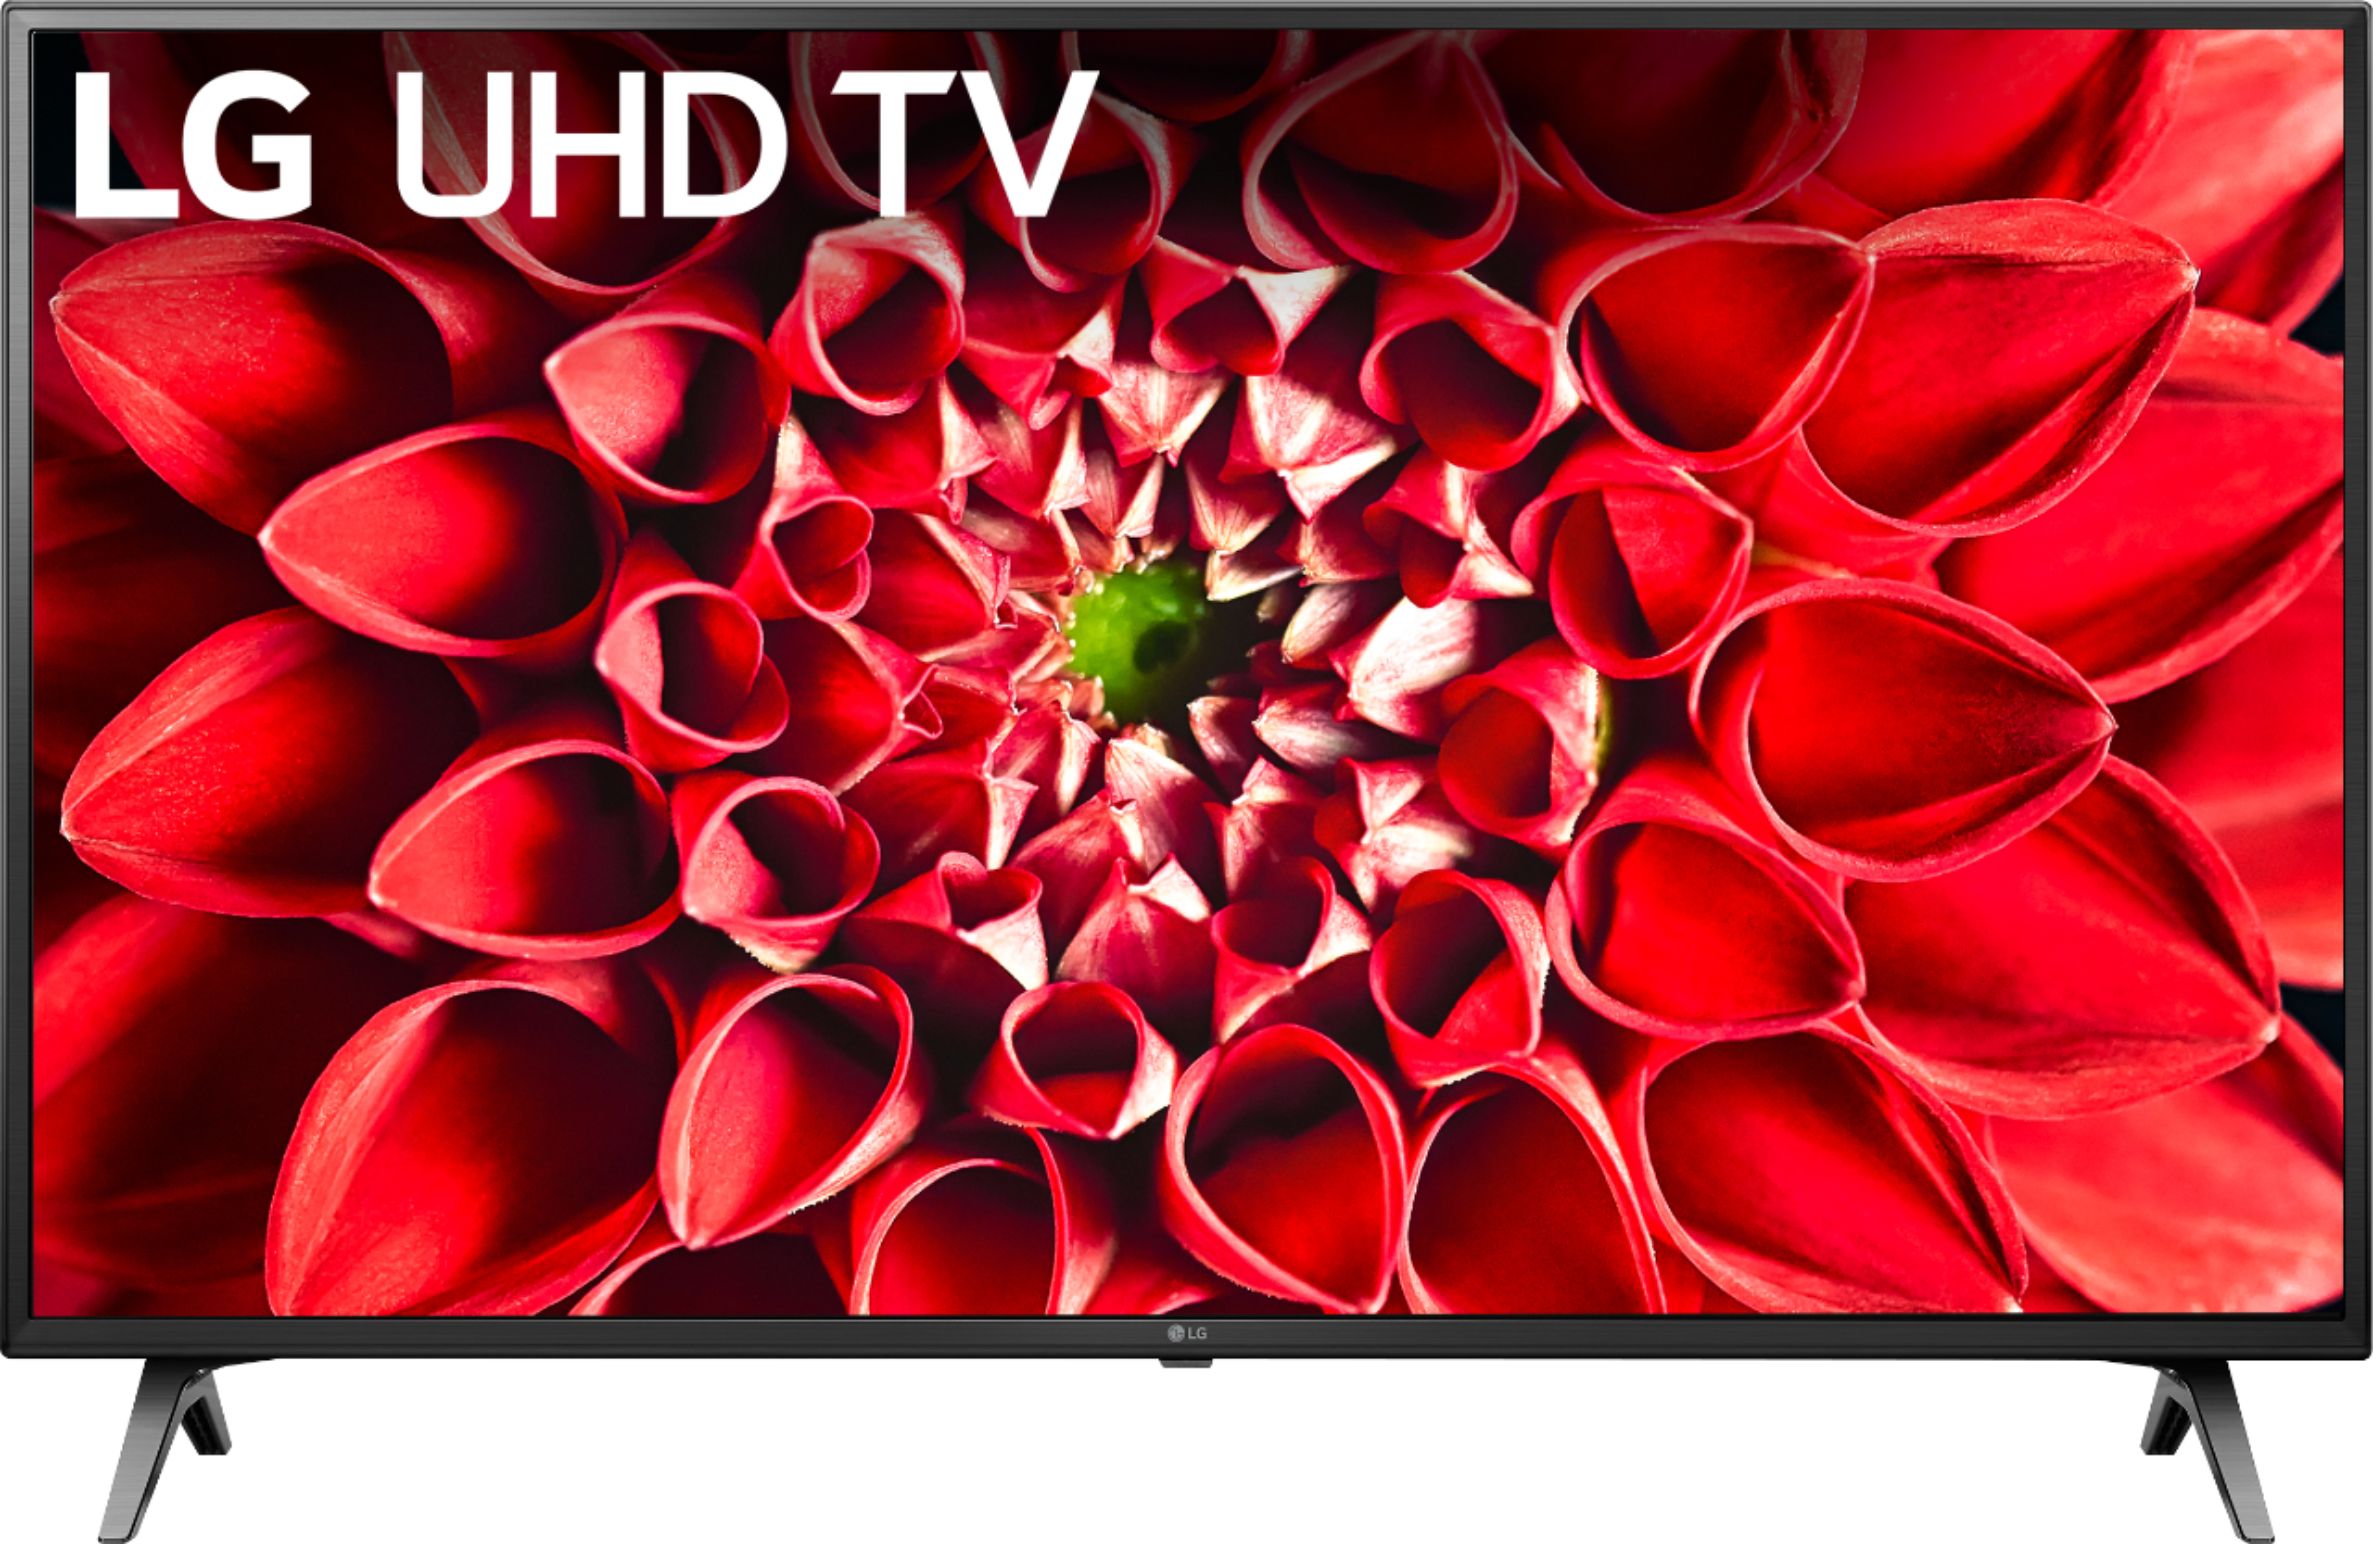 LG - 60" Class - UN7000 Series - 4K UHD TV - Smart - LED - with HDR $449.99